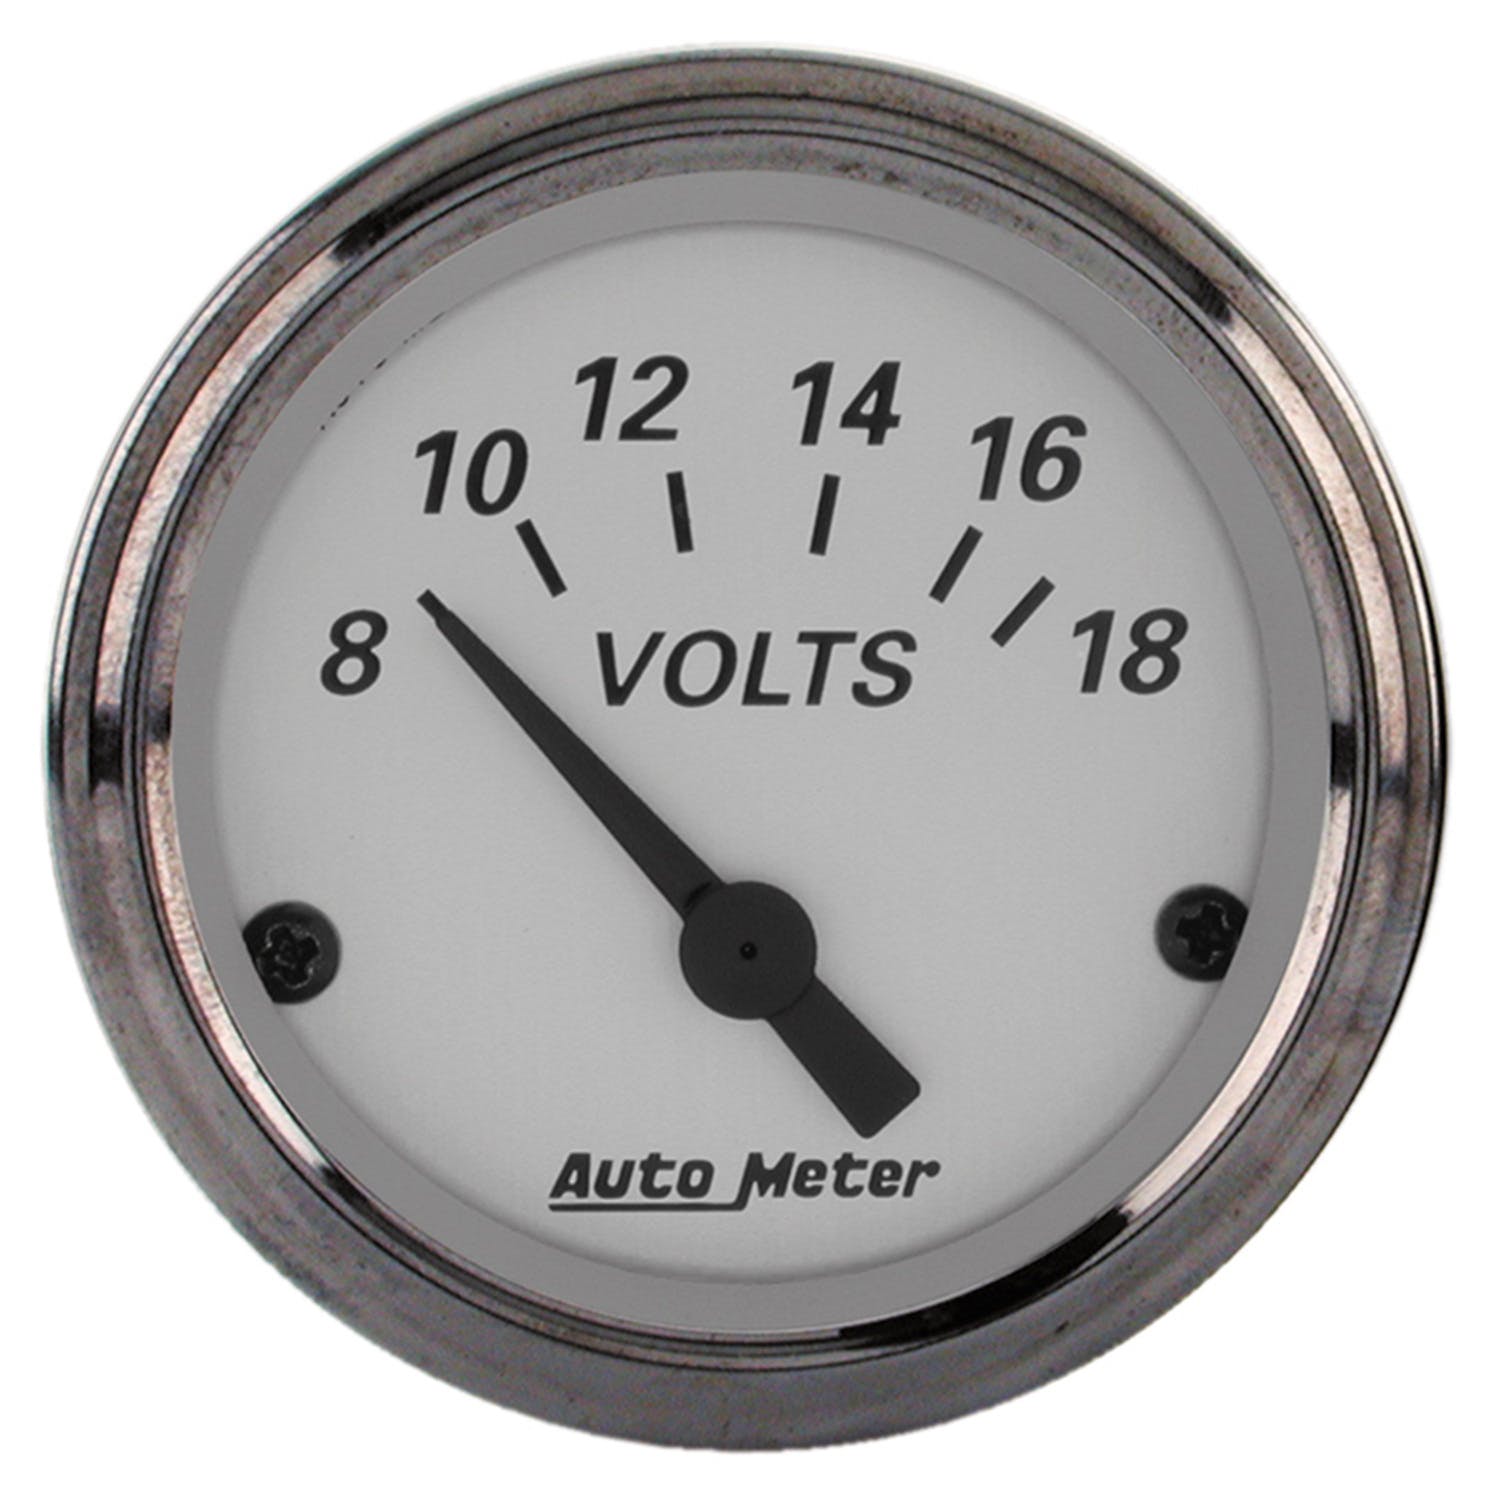 AutoMeter Products 1992 Voltmeter 8-18 Volts